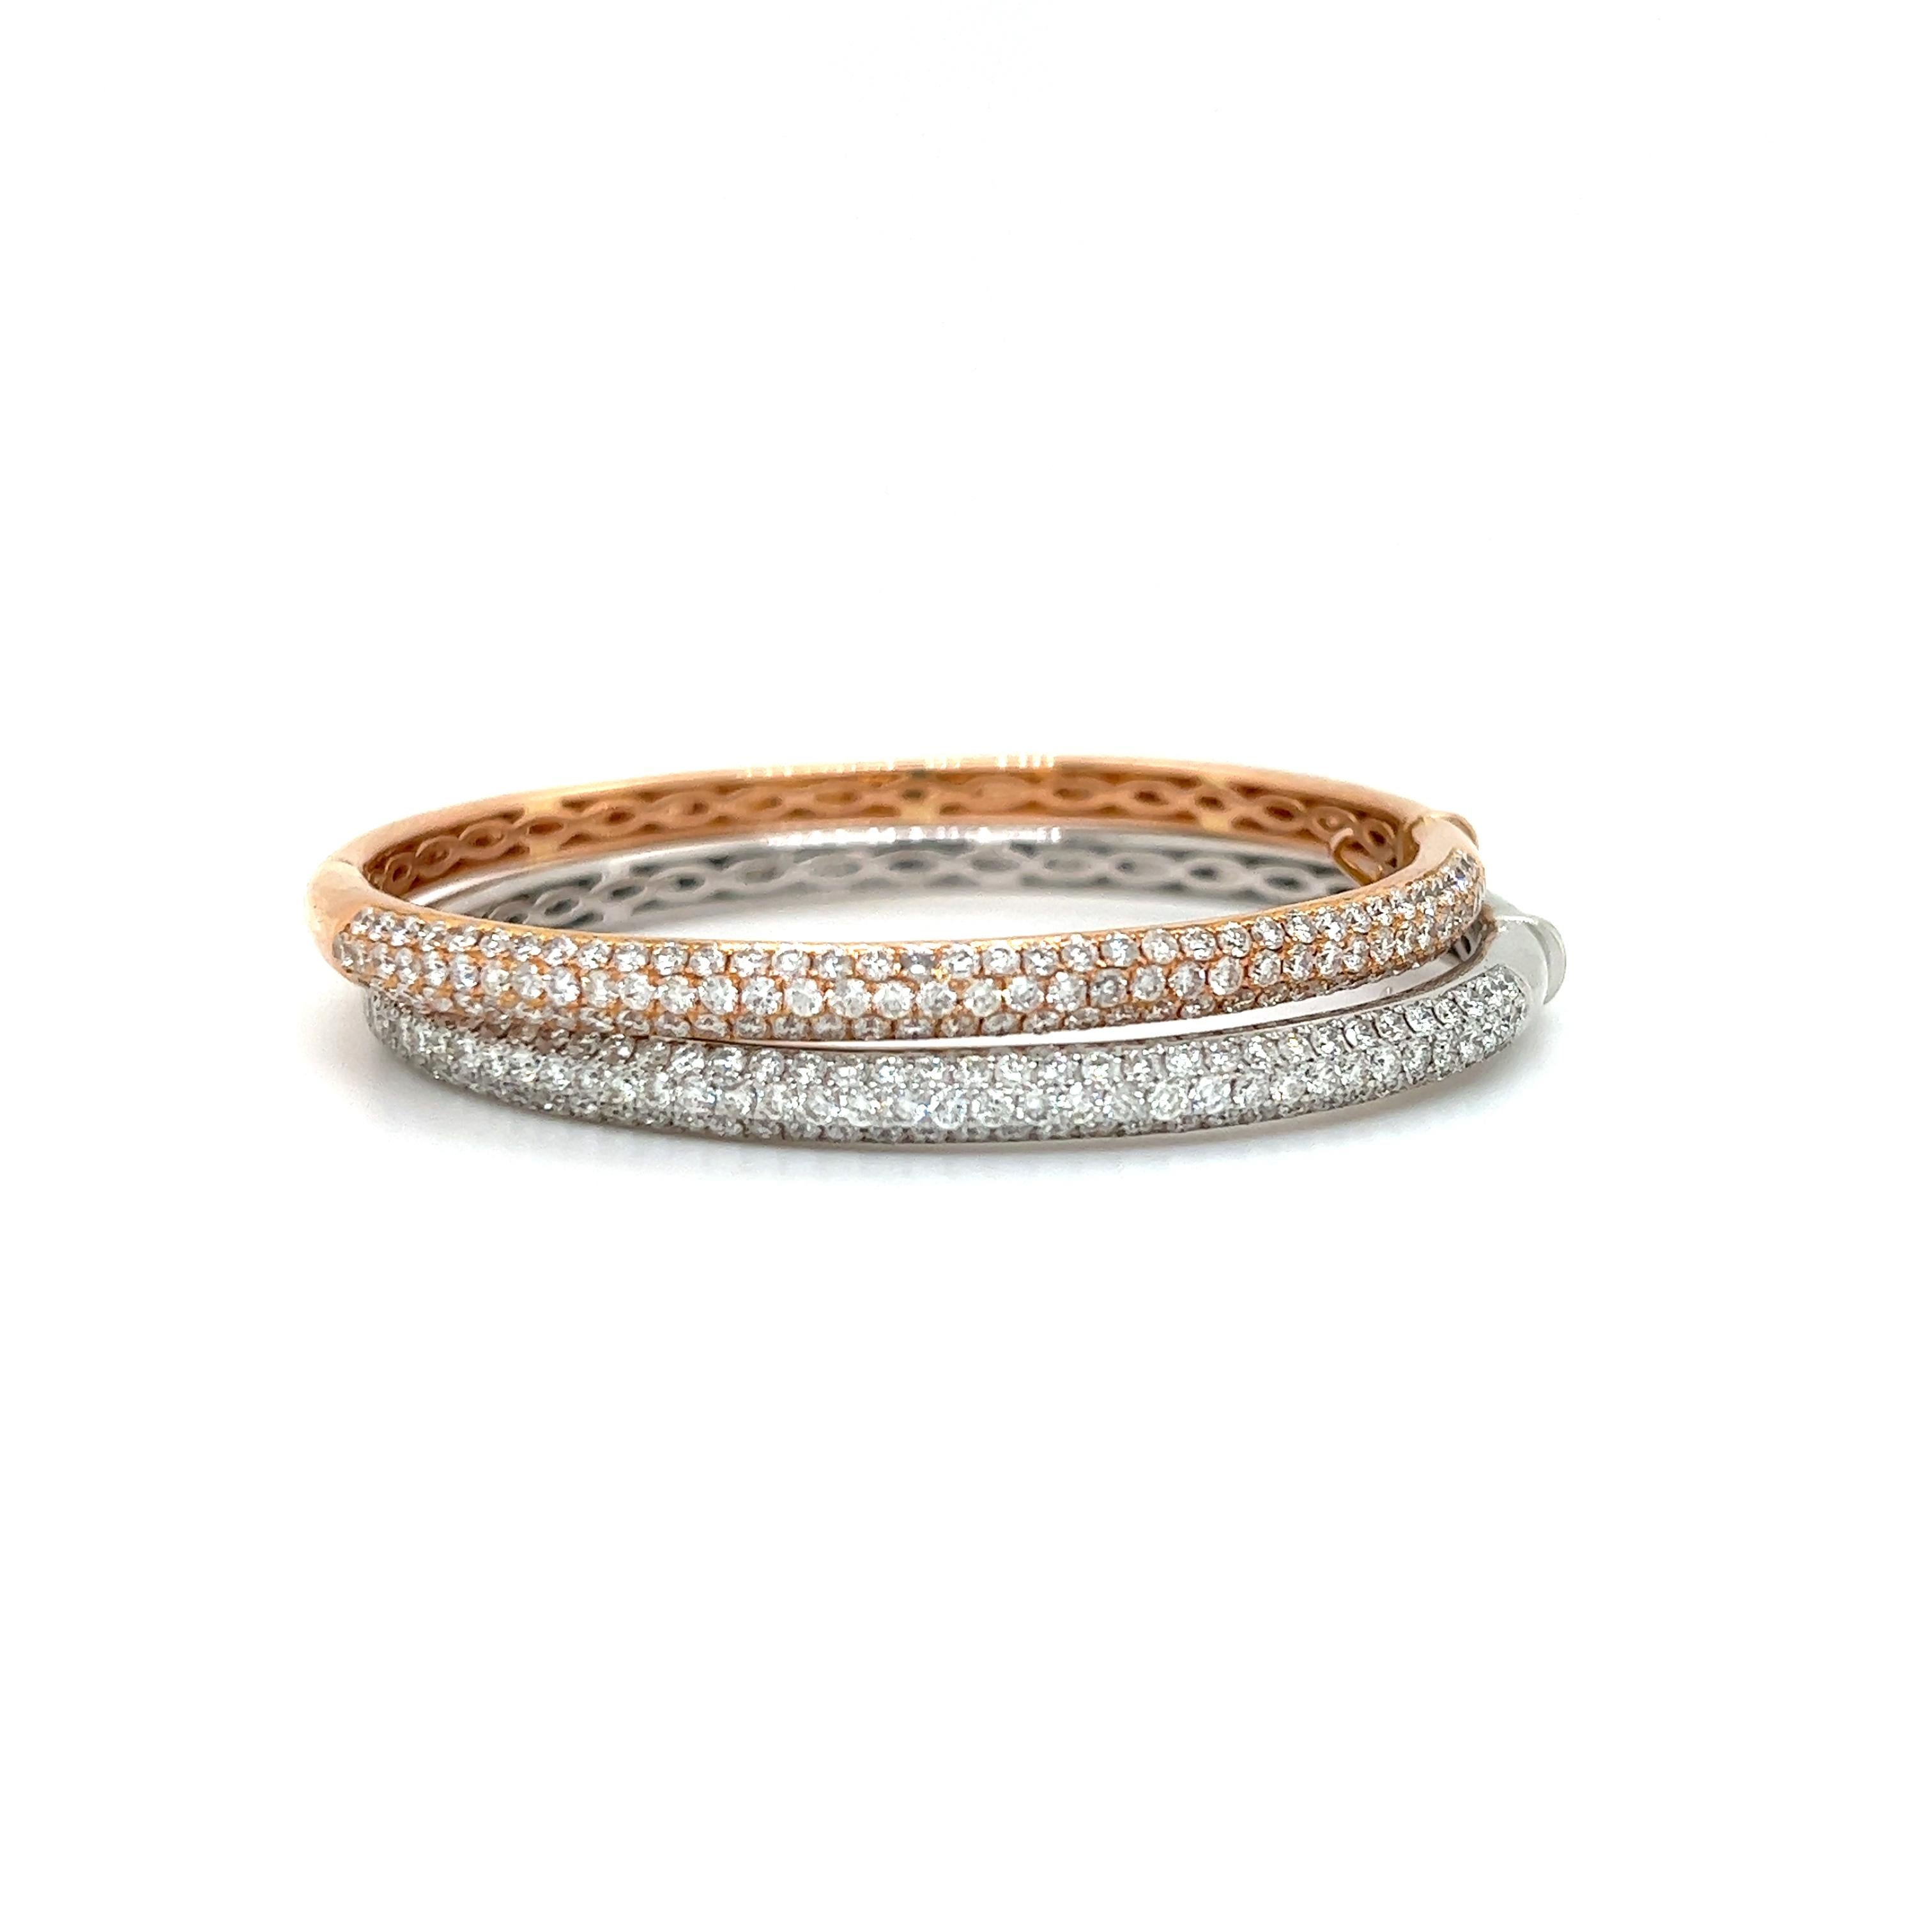 Amazing pair of white and yellow gold 18k diamond bangle bracelets. The pair are set with earth mined natural round brilliant cut diamonds. The diamonds are set in a three row pattern encompassing the top half of the design.  The bangles together